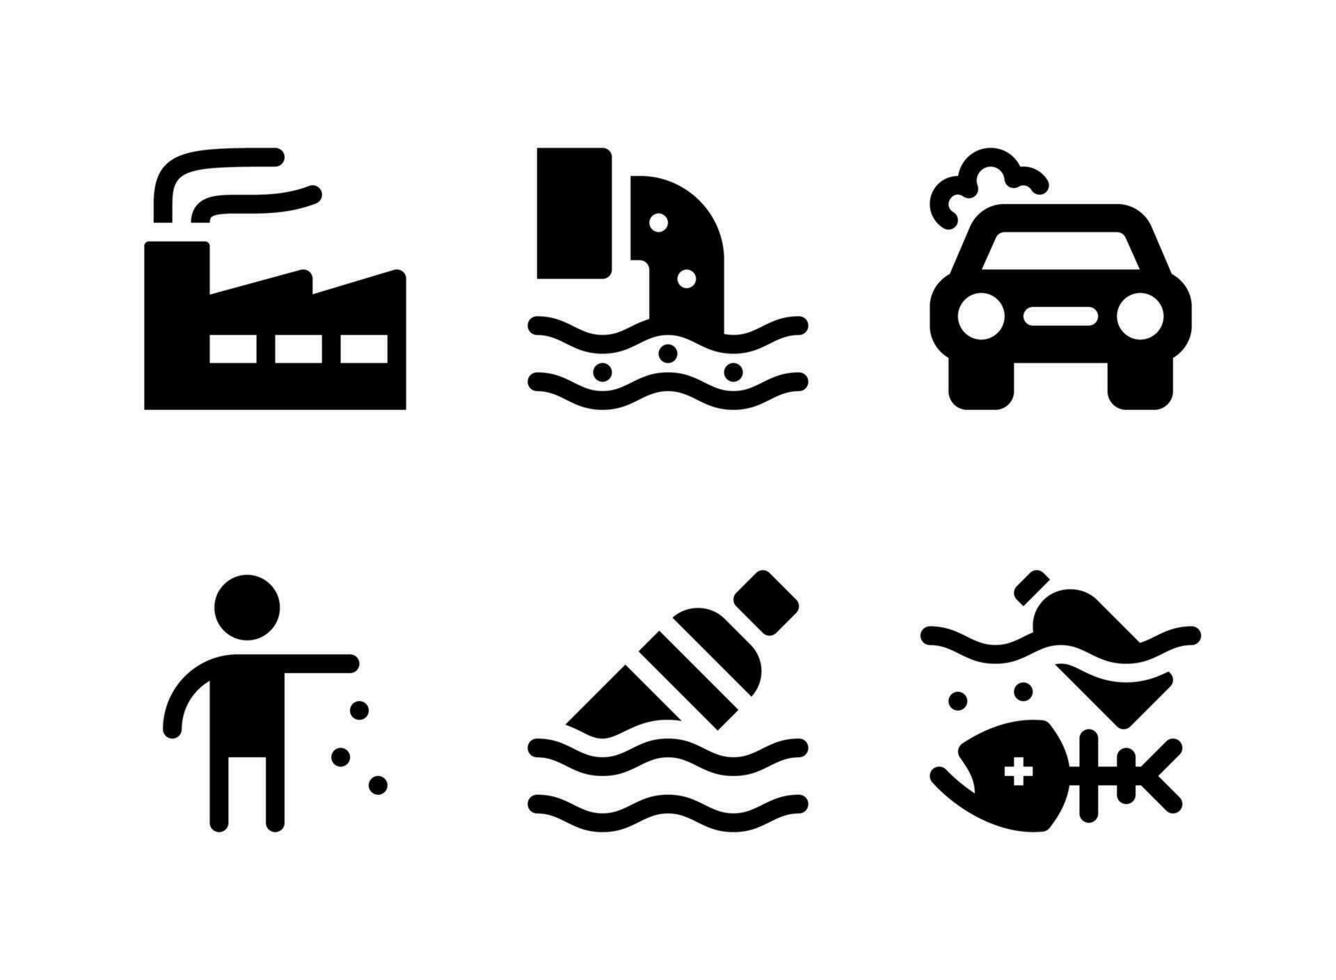 Simple Set of Pollution Related Vector Solid Icons. Contains Icons as Factory, Dead Fish, Litter, Floating Bottle and more.